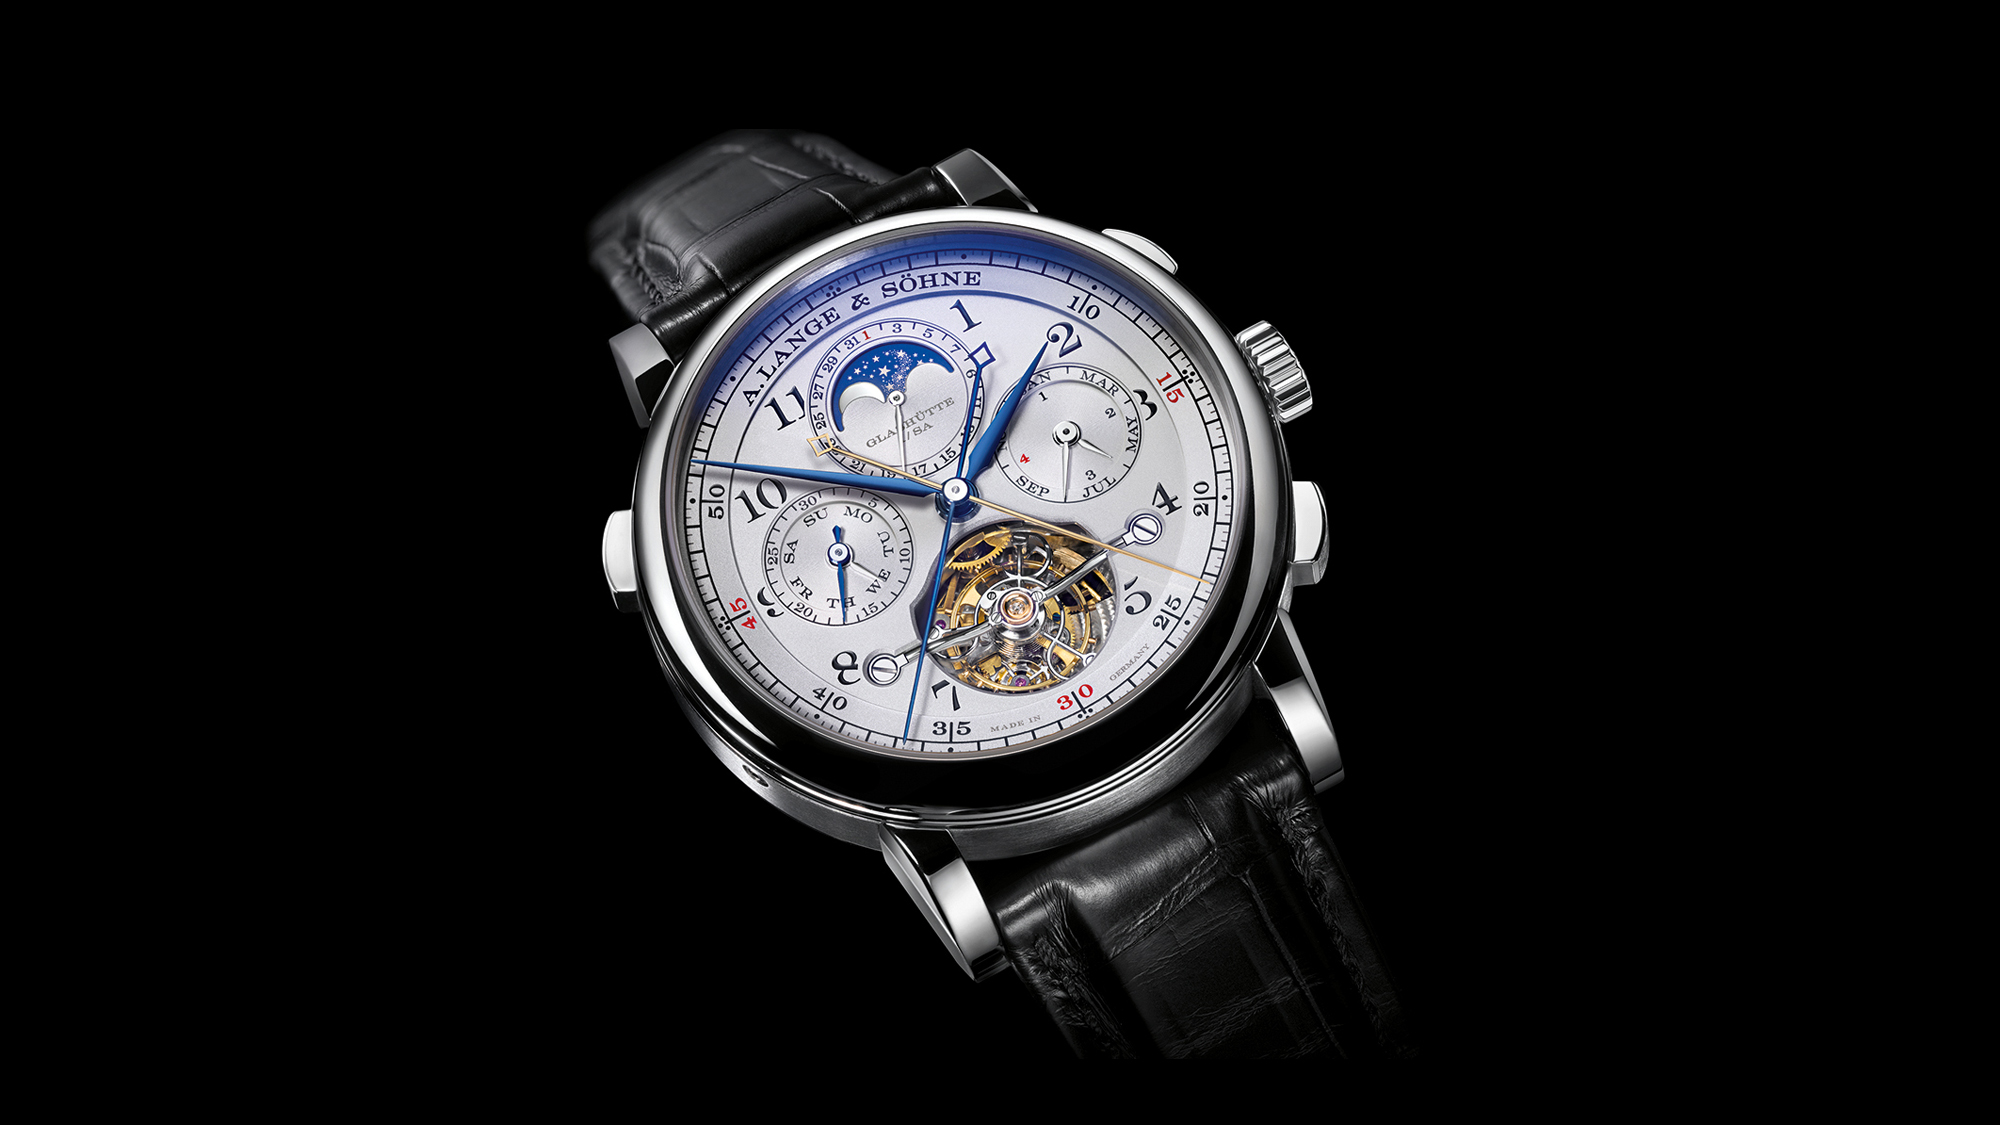 A Lange & Söhne high quality of German fine watchmaking Torres Joalheiros